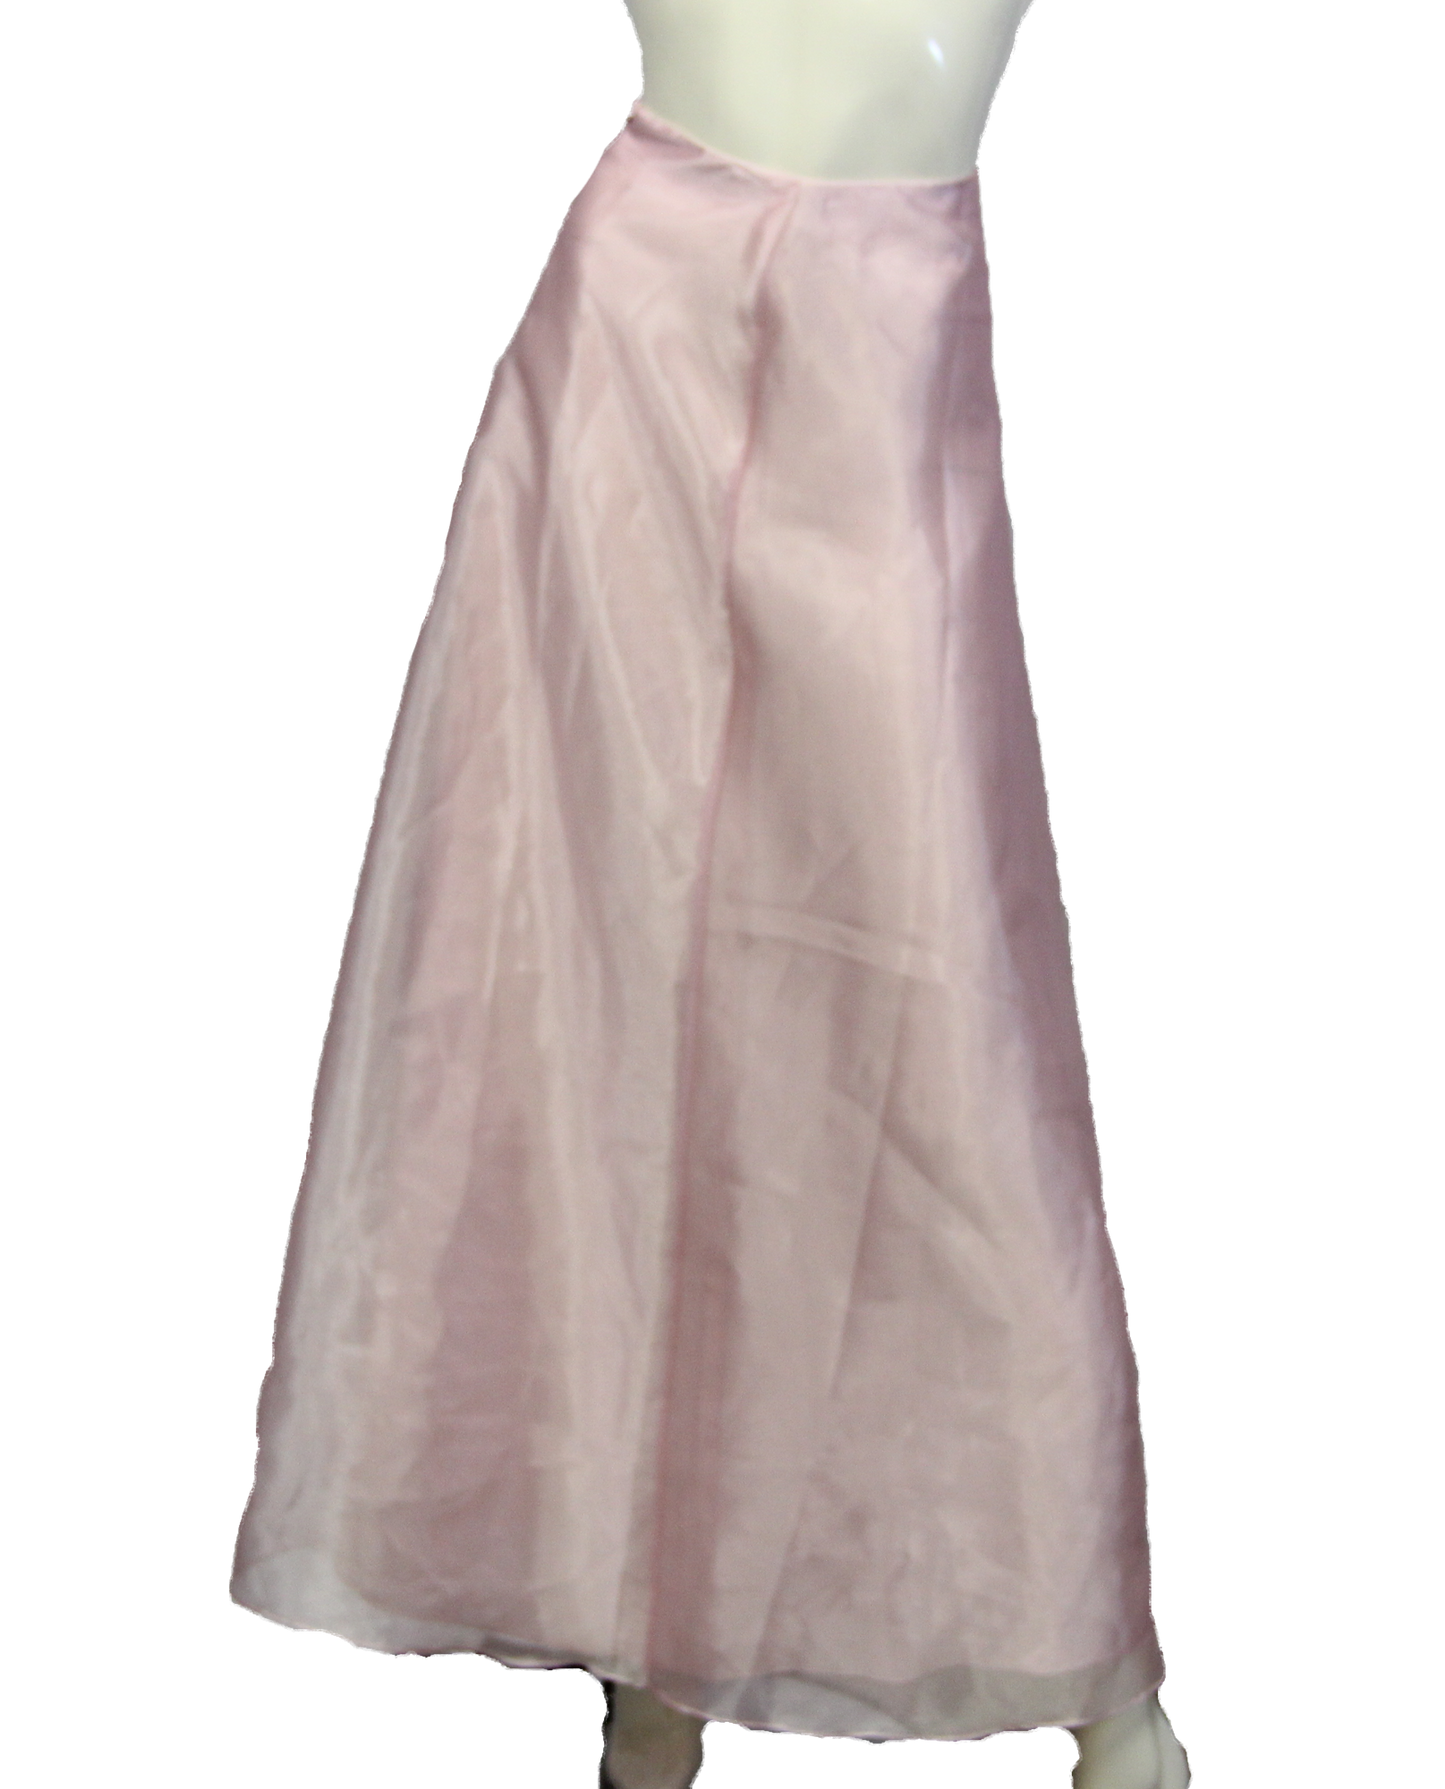 Load image into Gallery viewer, Belle of the Ball Maxi Pink Skirt Size S (SKU 000026) - Designers On A Dime - 1
